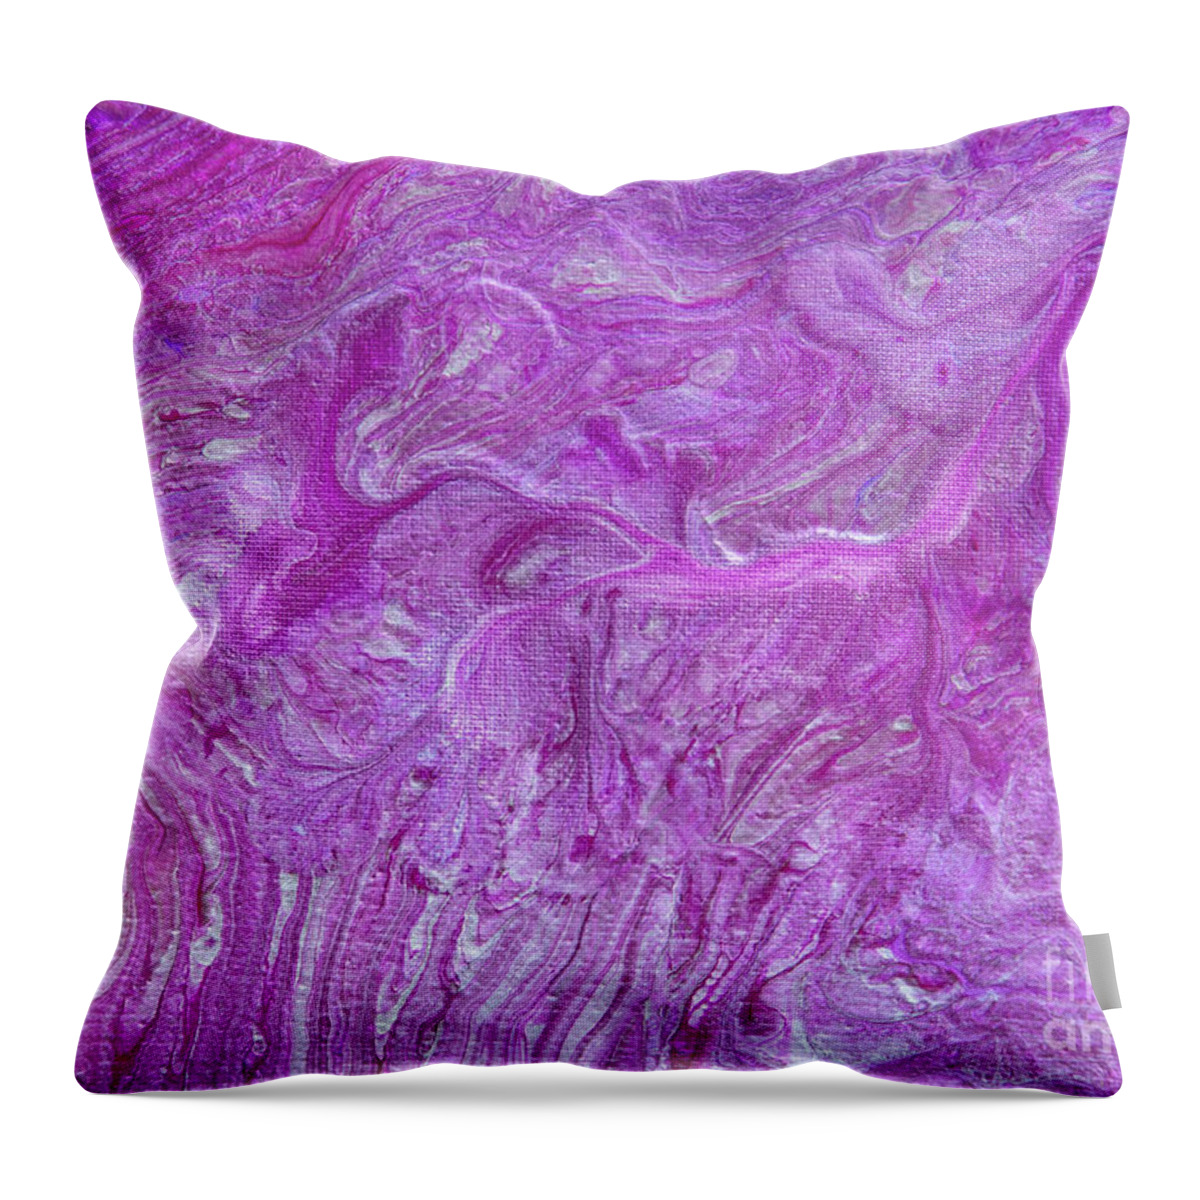 Acrylic Pour Throw Pillow featuring the painting Cranberry Sky by Elisabeth Lucas